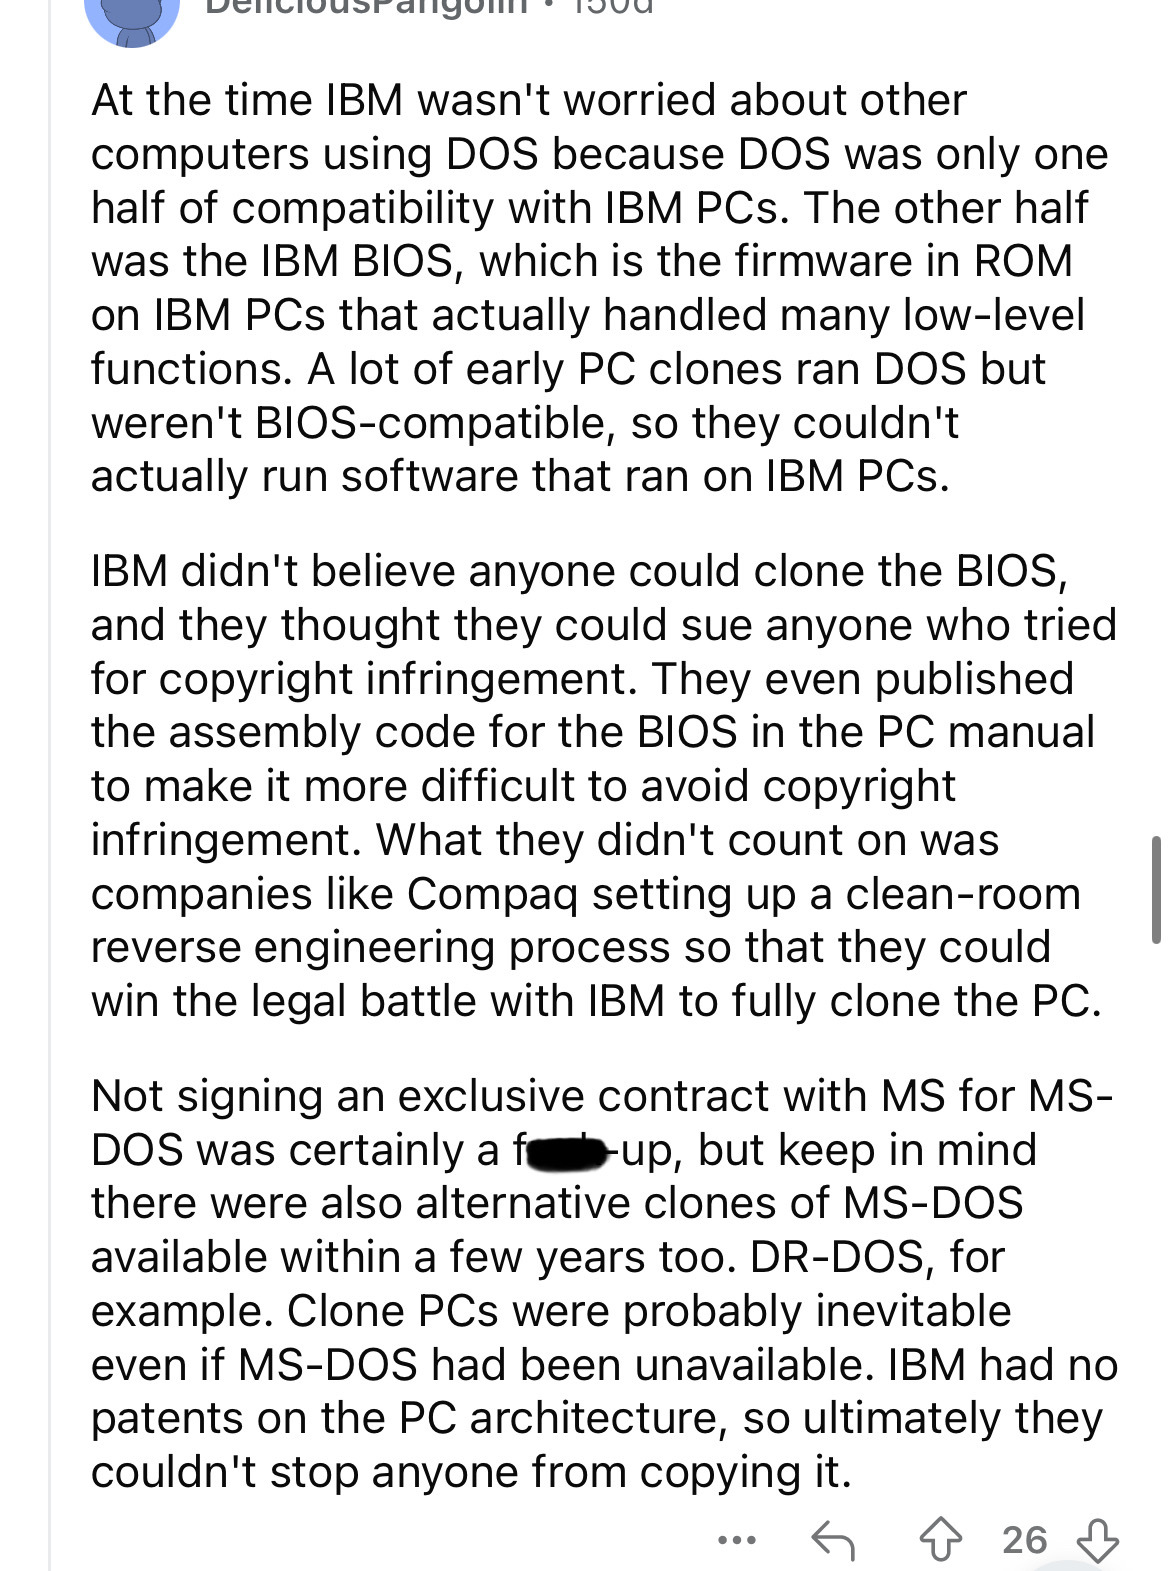 document - At the time Ibm wasn't worried about other computers using Dos because Dos was only one half of compatibility with Ibm PCs. The other half was the Ibm Bios, which is the firmware in Rom on Ibm PCs that actually handled many lowlevel functions. 